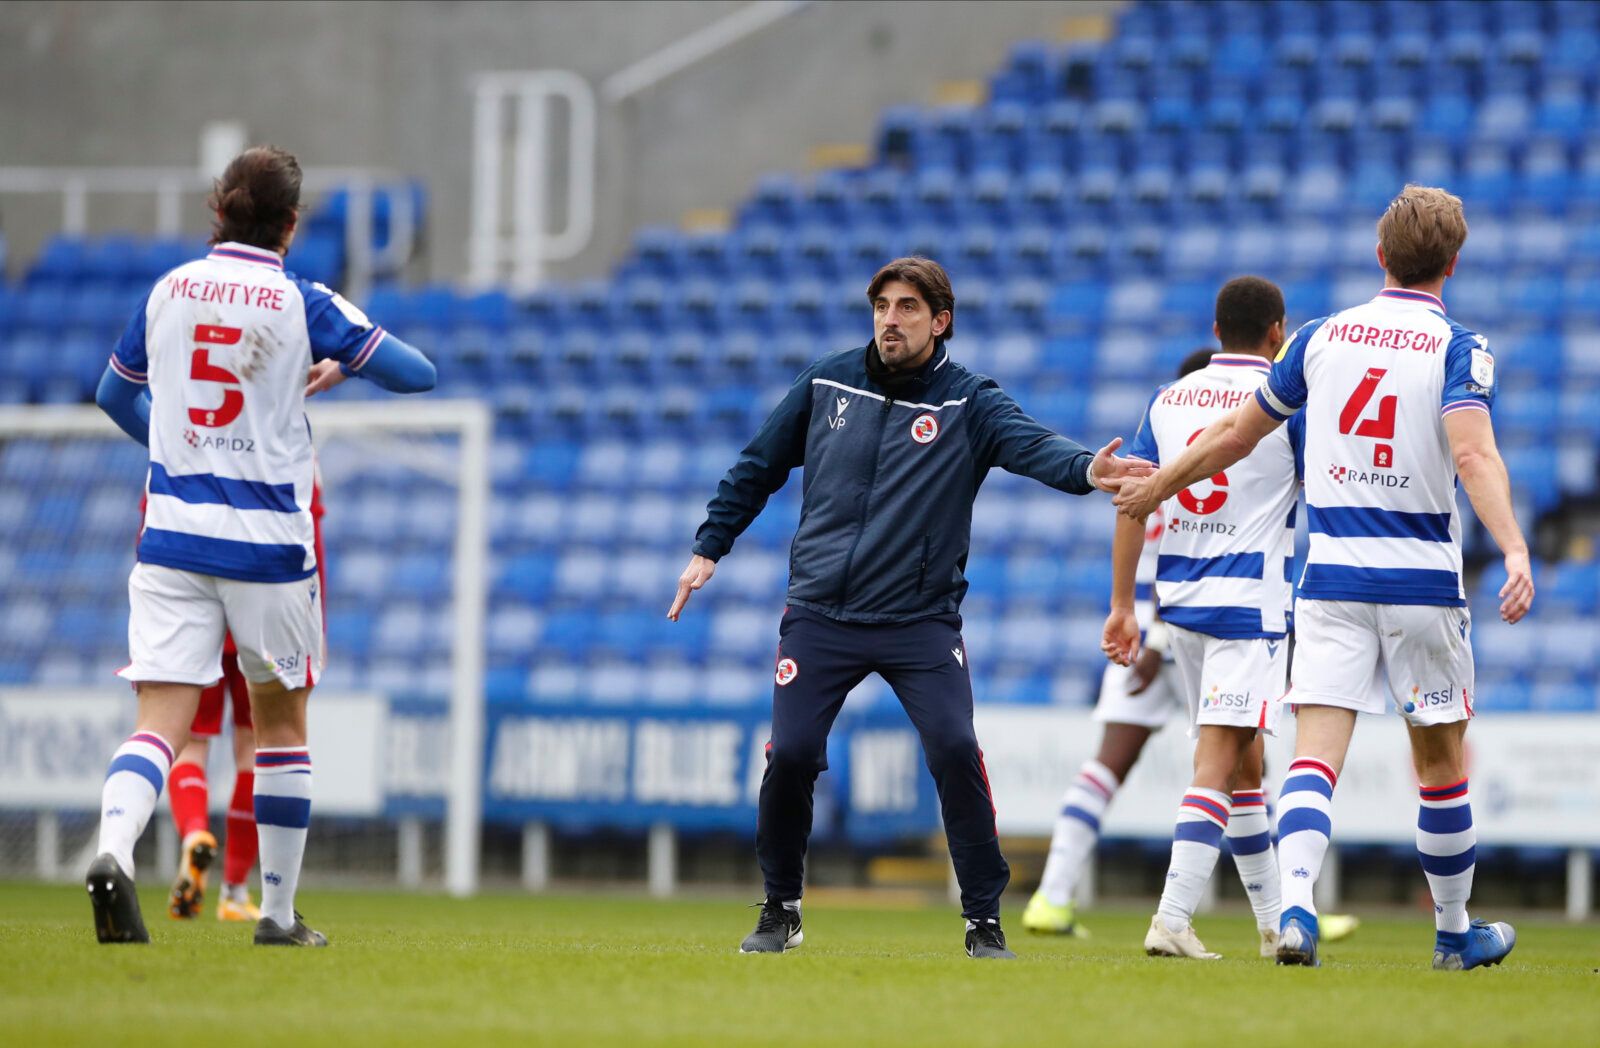 Soccer Football - Championship - Reading v Middlesbrough - Madejski Stadium, Reading, Britain - February 20, 2021 Reading Manager Veljko Paunovic at half time Action Images/Paul Childs EDITORIAL USE ONLY. No use with unauthorized audio, video, data, fixture lists, club/league logos or 'live' services. Online in-match use limited to 75 images, no video emulation. No use in betting, games or single club /league/player publications.  Please contact your account representative for further details.